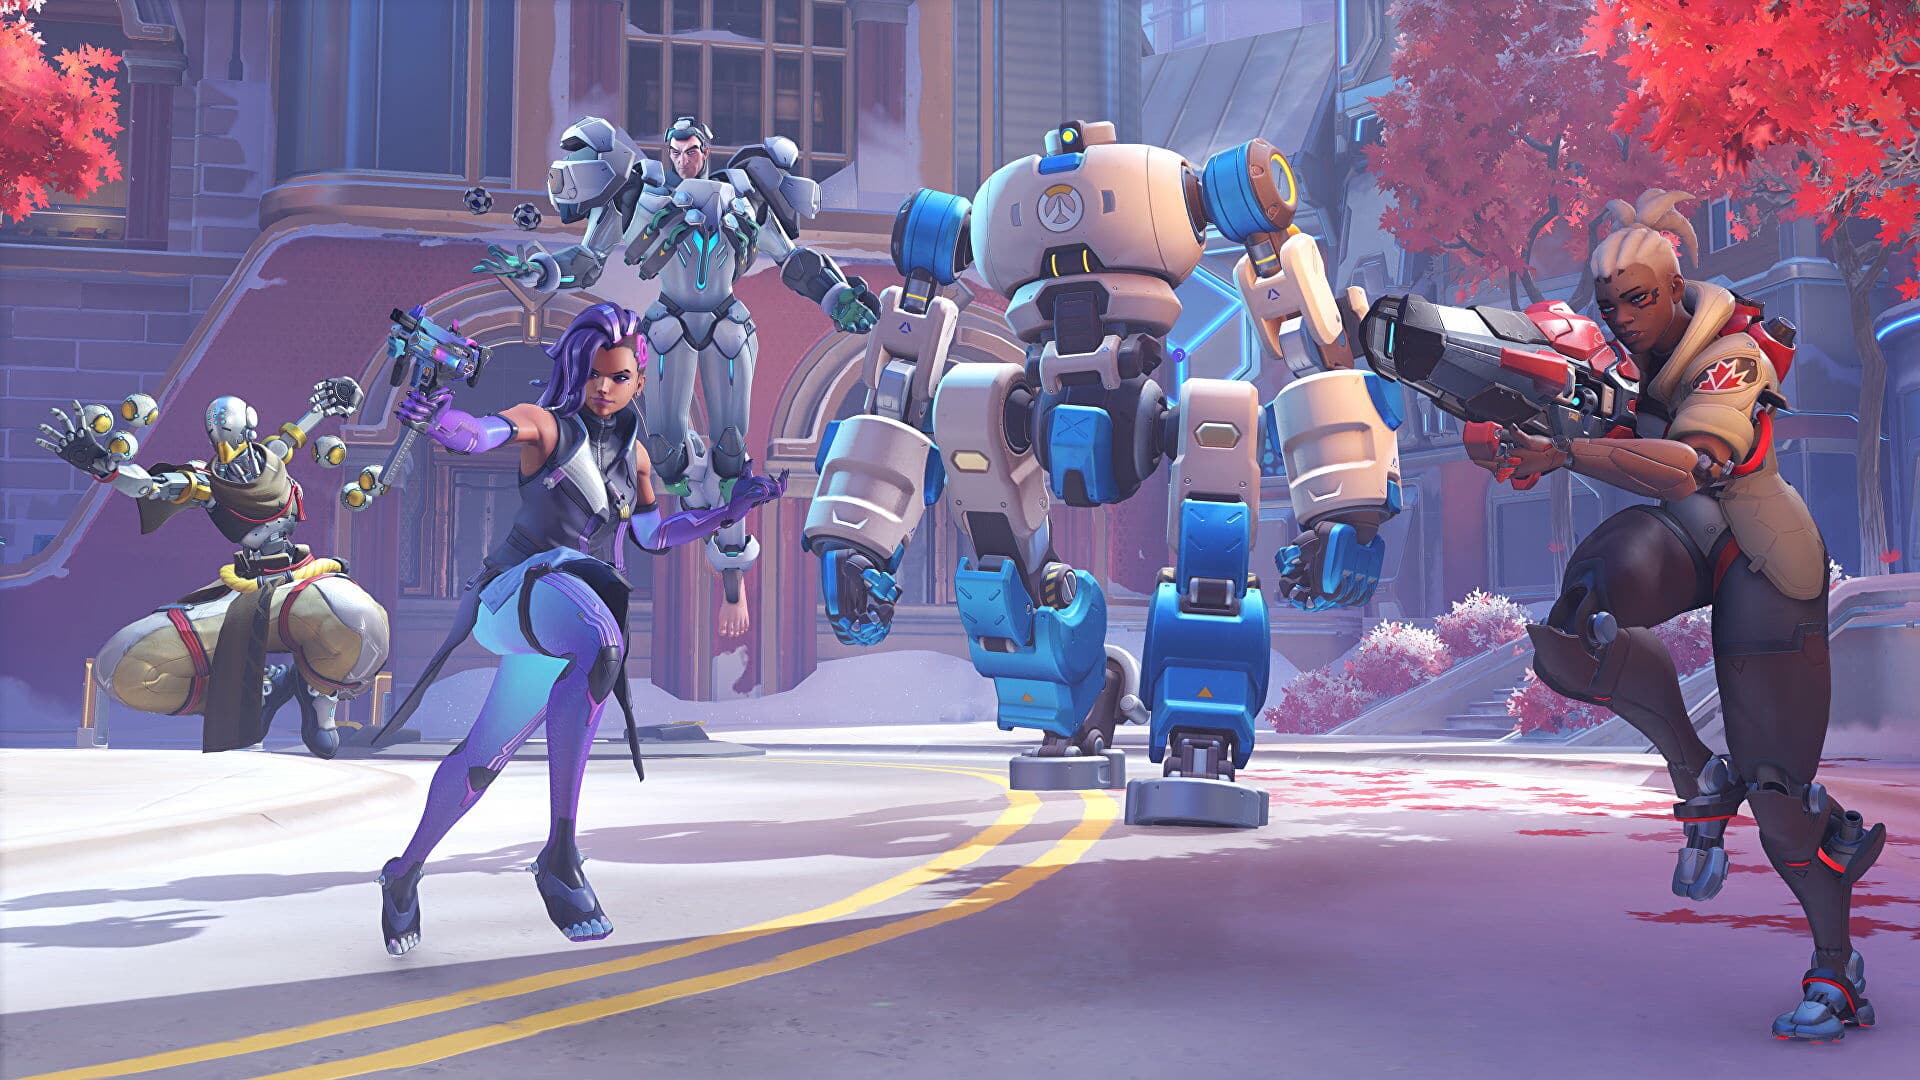 Overwatch 2 is coming this October and will be free to play